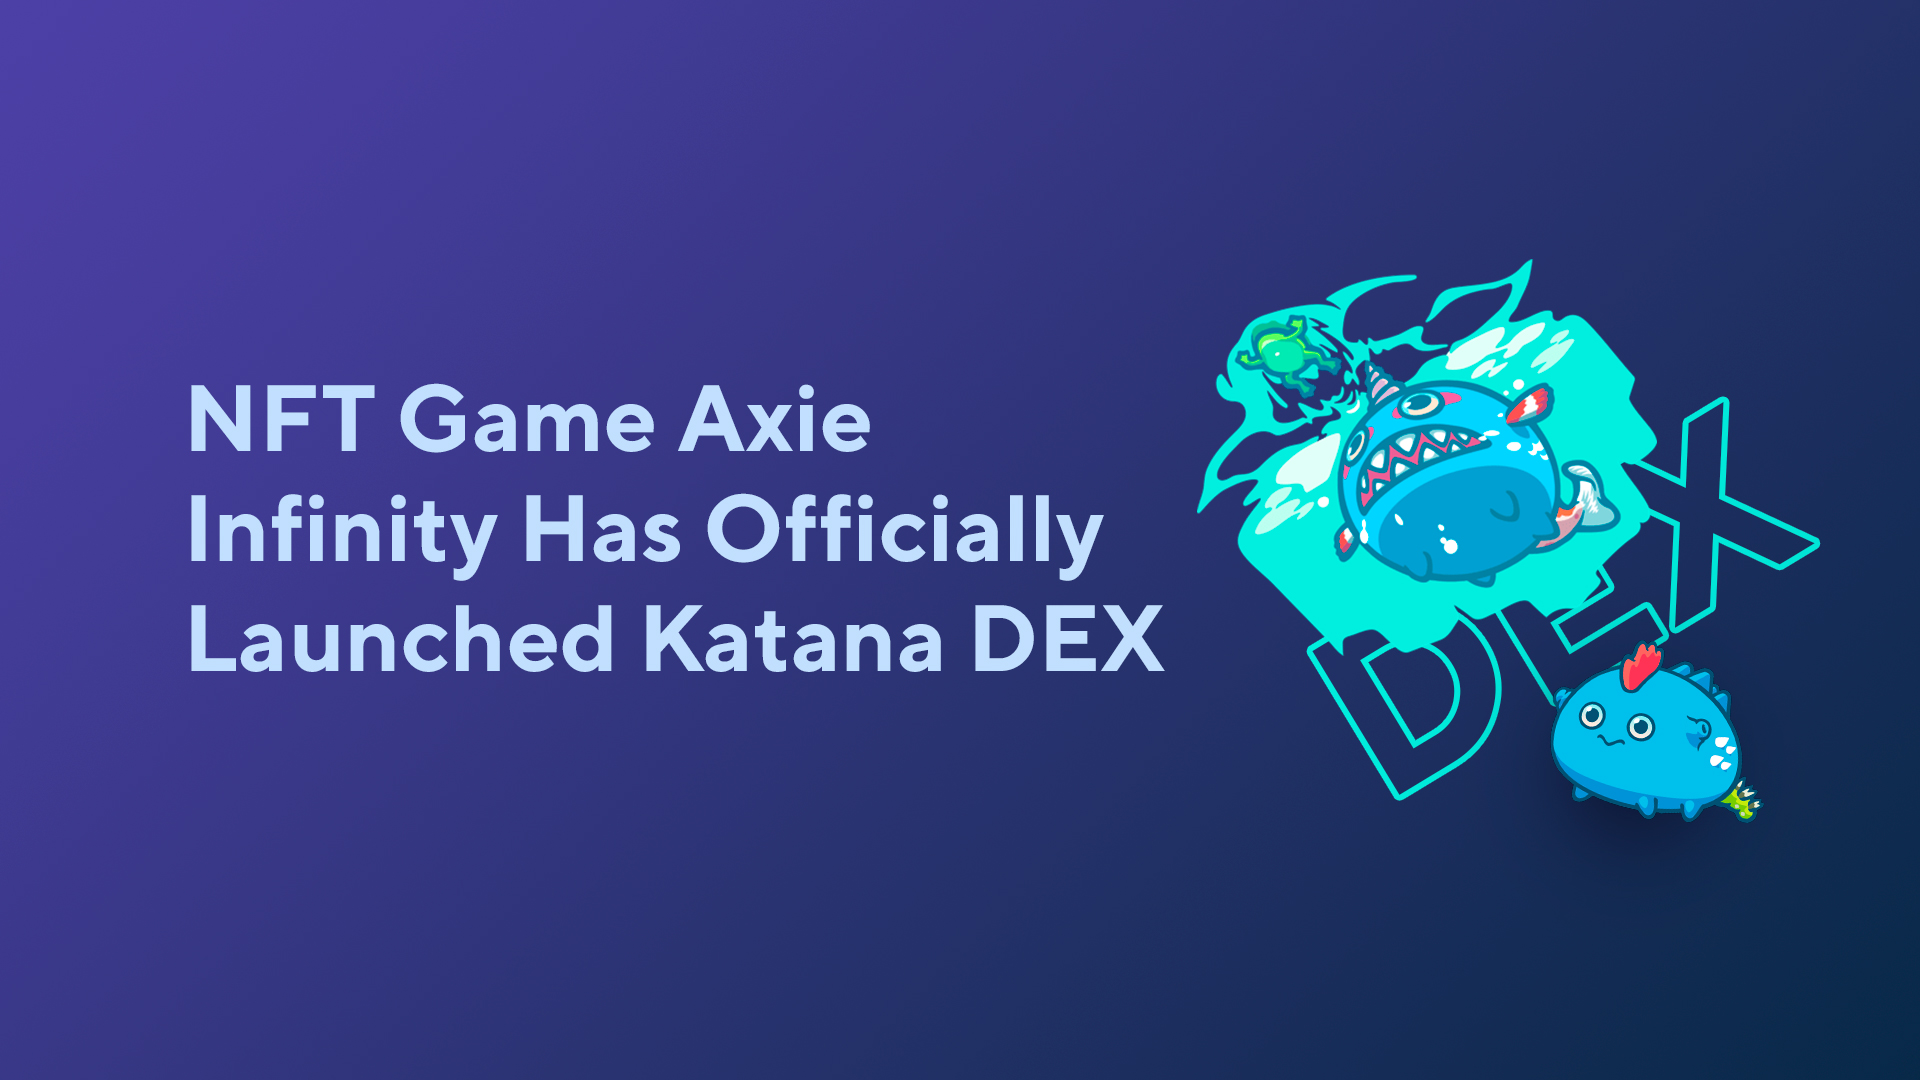 NFT Game Axie Infinity Has Officially Launched Katana DEX